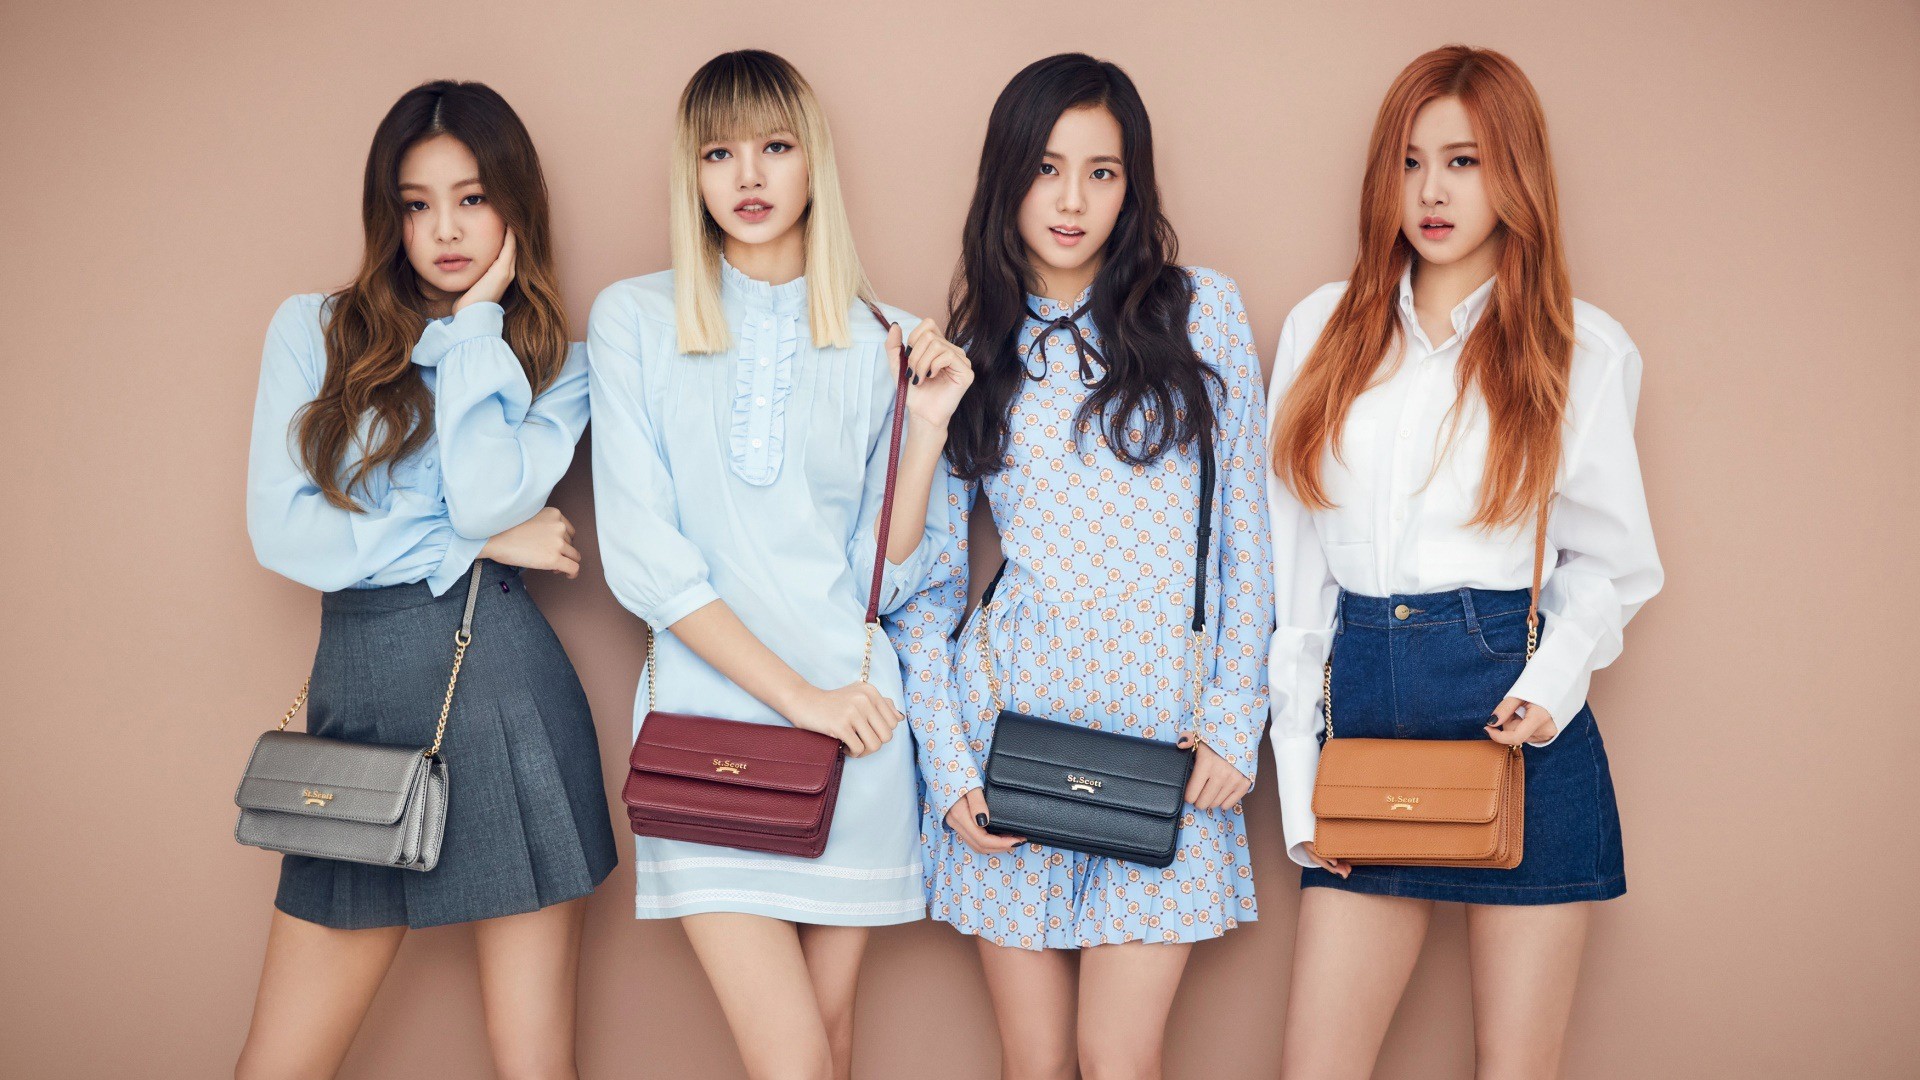 Wallpaper HD Blackpink with high-resolution 1920x1080 pixel. You can use this wallpaper for your Desktop Computer Backgrounds, Mac Wallpapers, Android Lock screen or iPhone Screensavers and another smartphone device